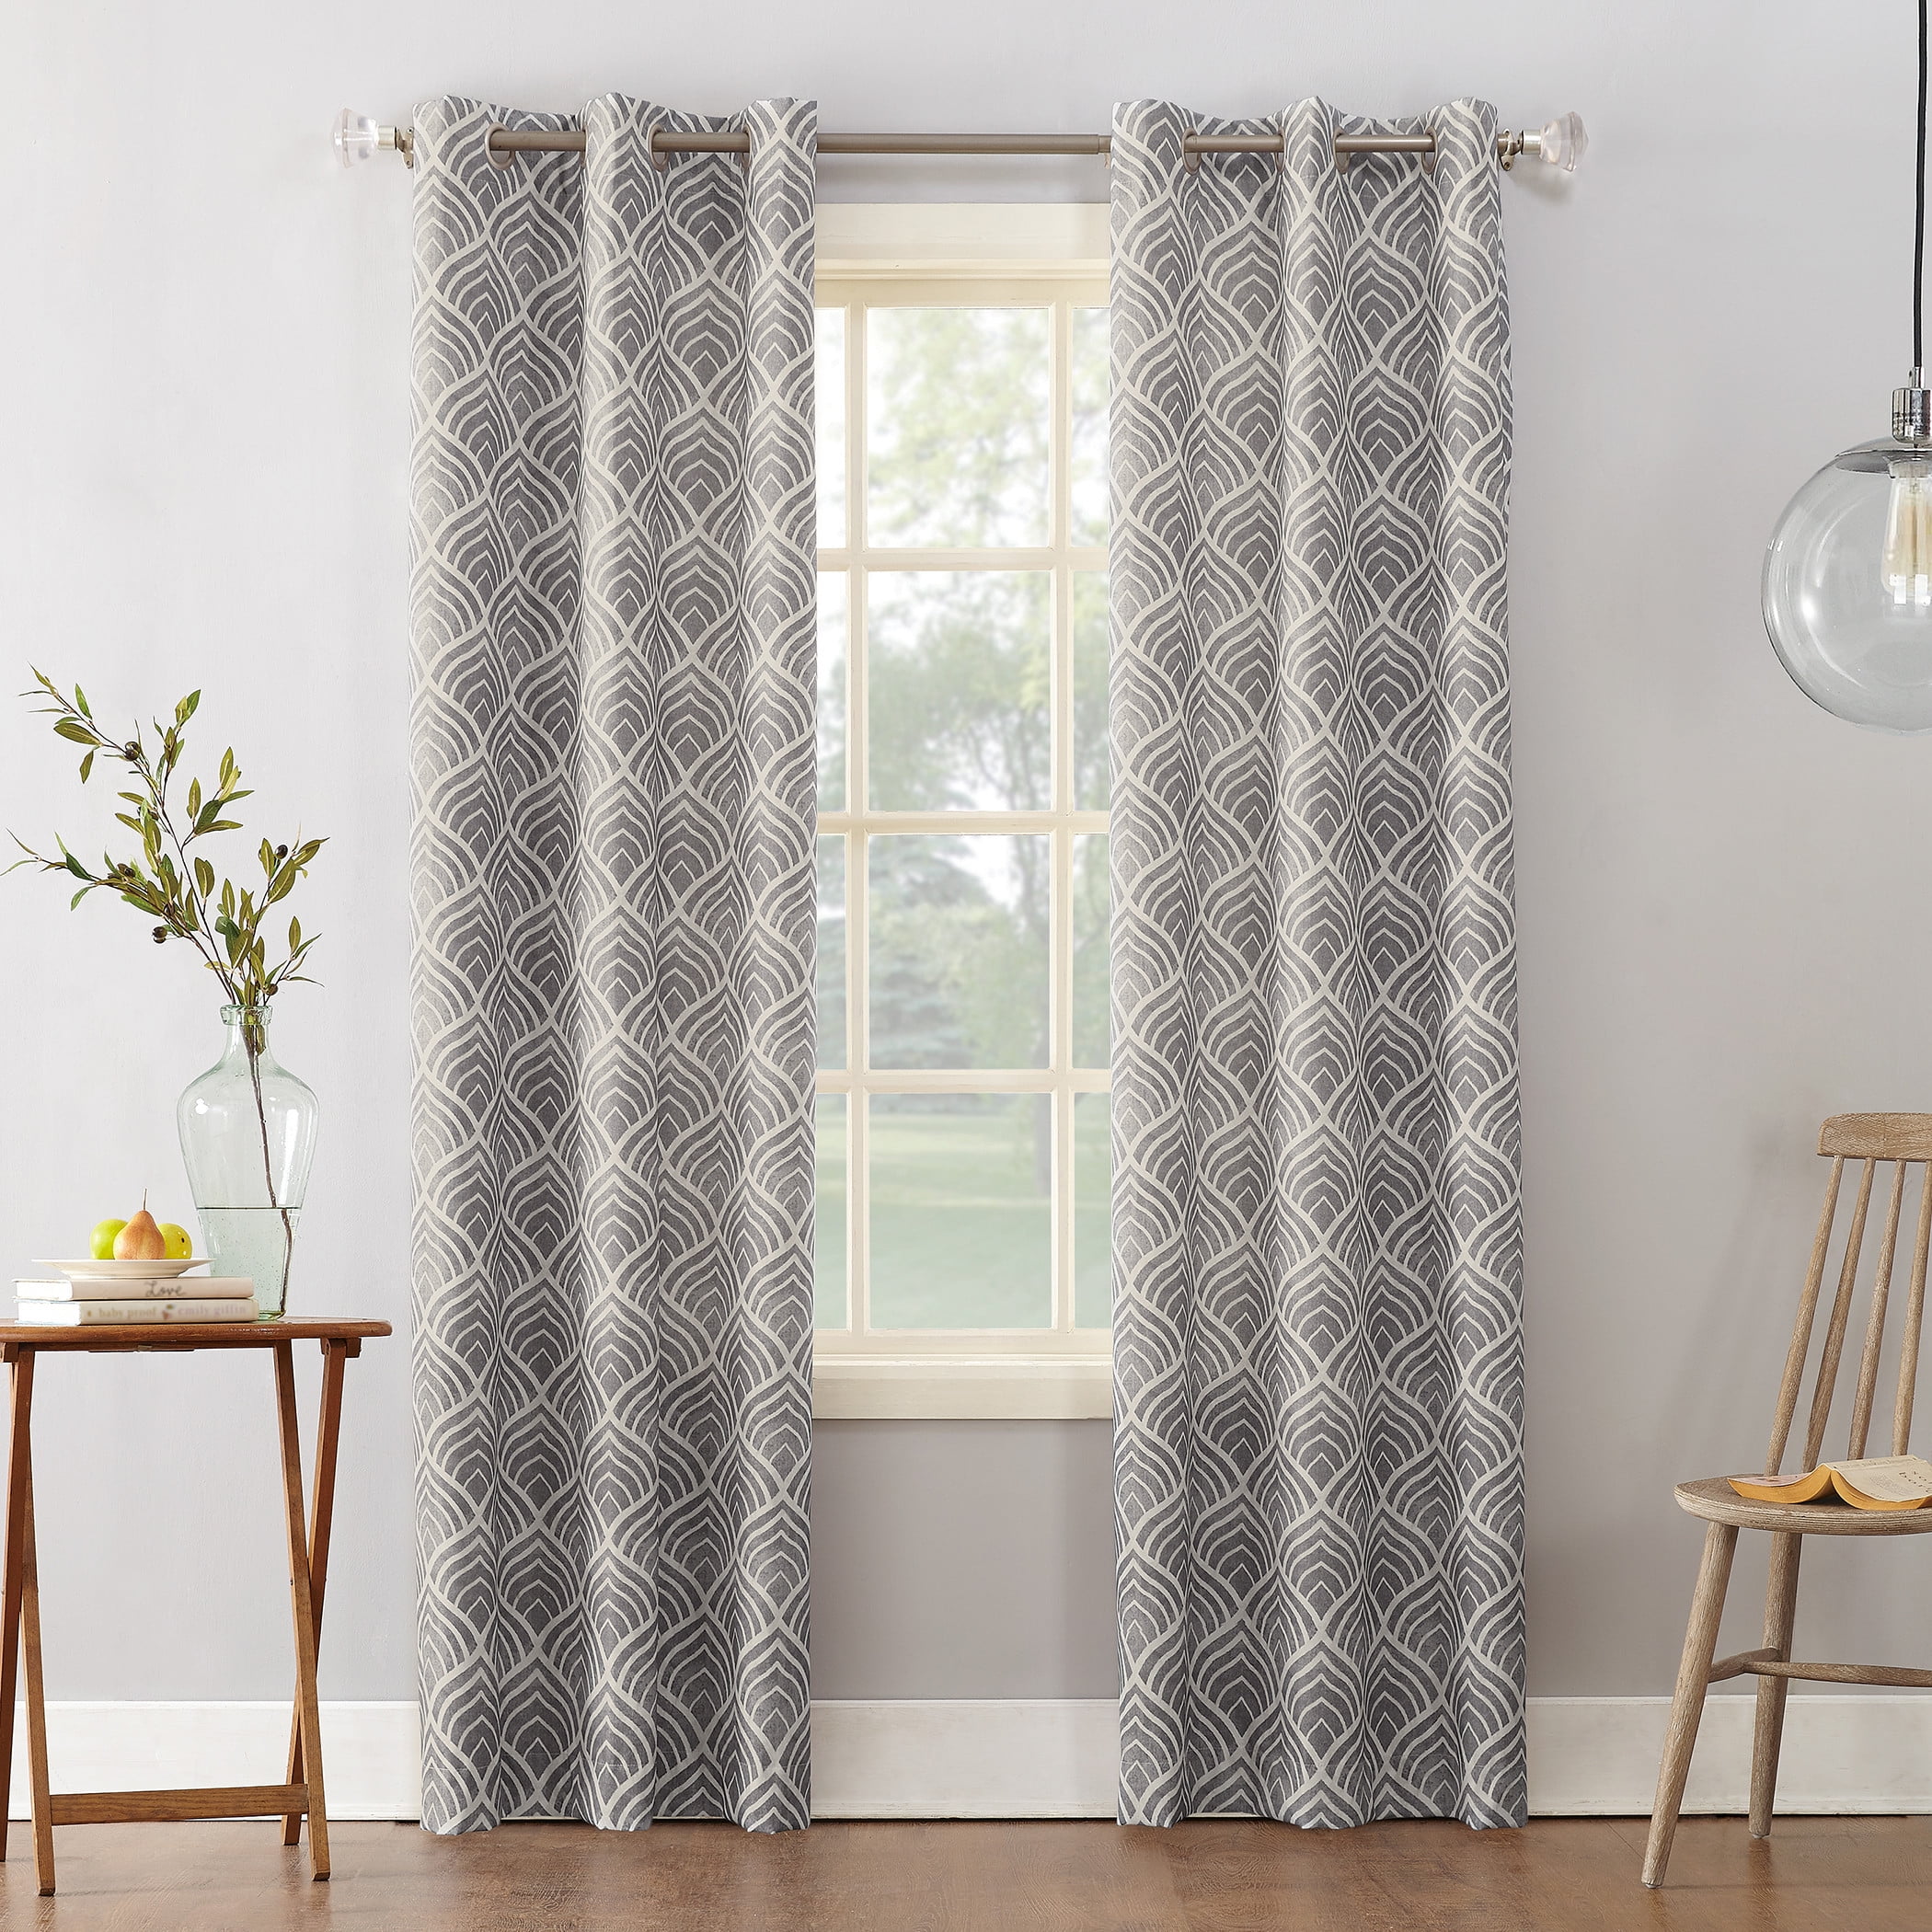 Blue Sun Zero Cooper Textured Thermal-Lined Grommet Curtain Panel 40/" x 95/"